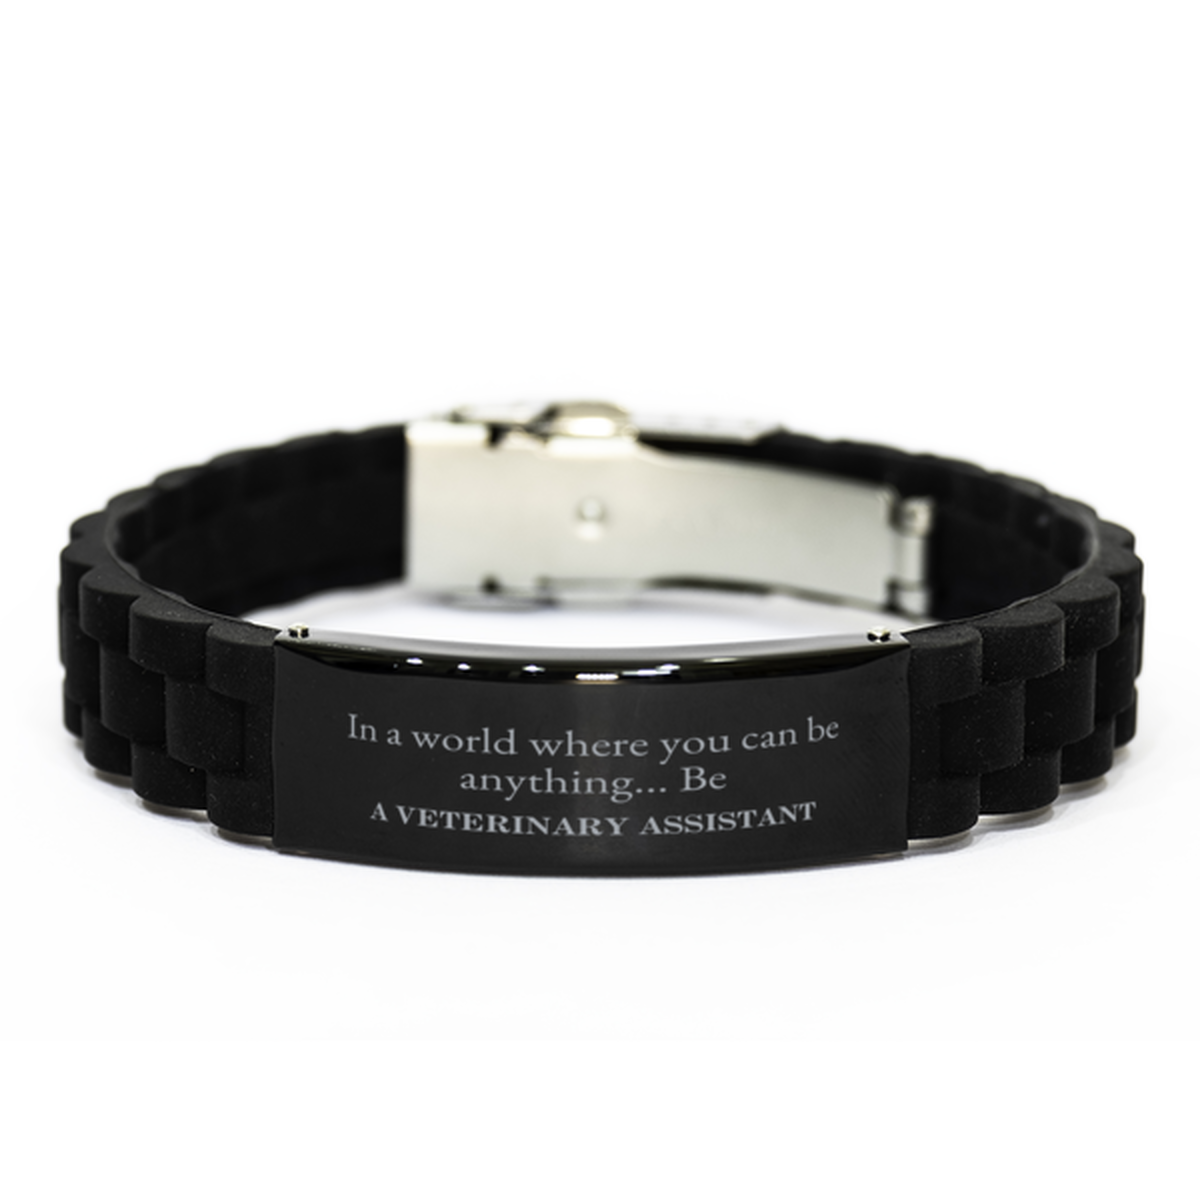 Gifts for Veterinary Assistant, In a world where you can be anything, Appreciation Birthday Black Glidelock Clasp Bracelet for Men, Women, Friends, Coworkers